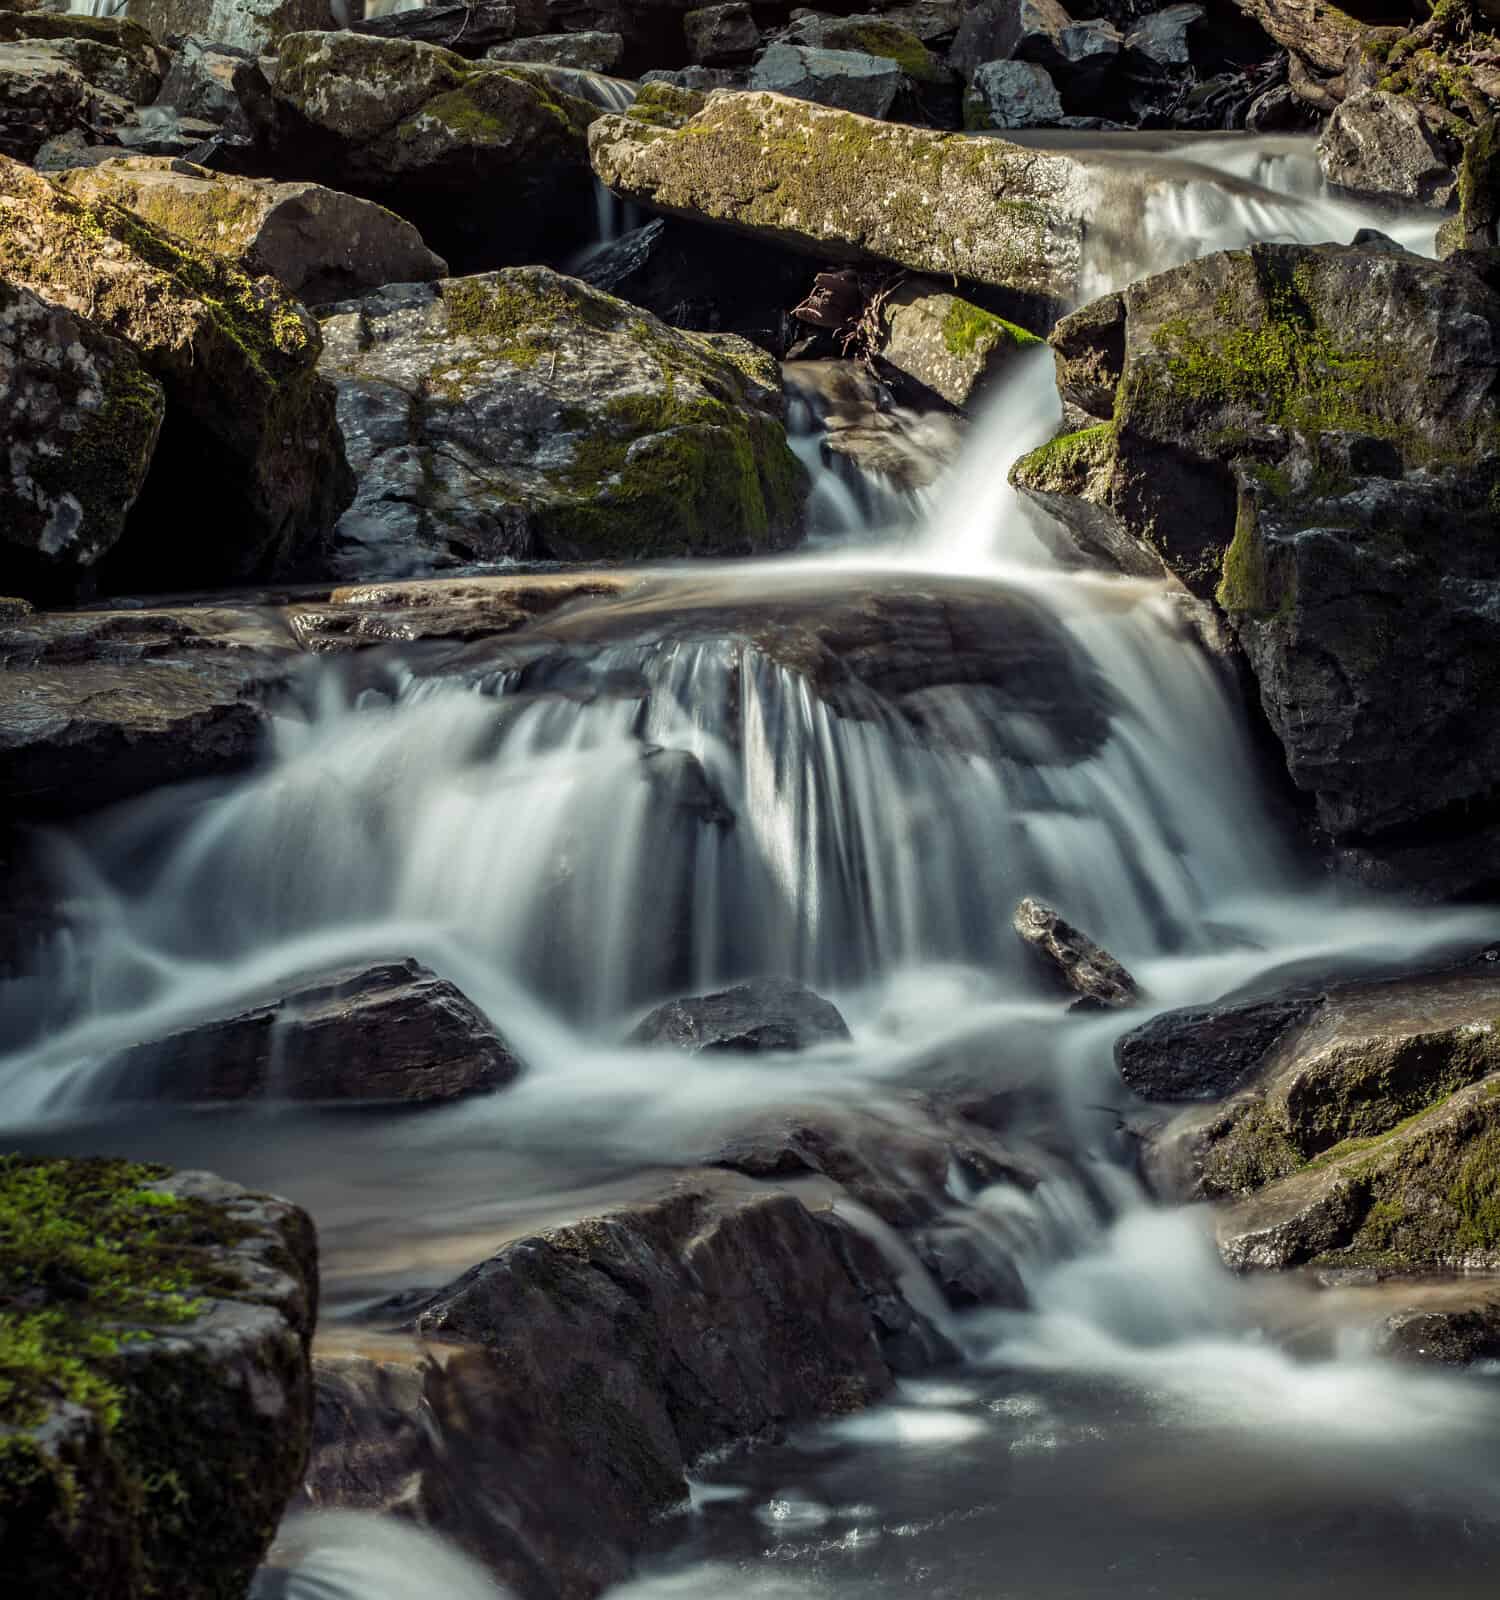 A long exposure of a small waterfall in Chittenango Falls State Park in Chittenango, NY.